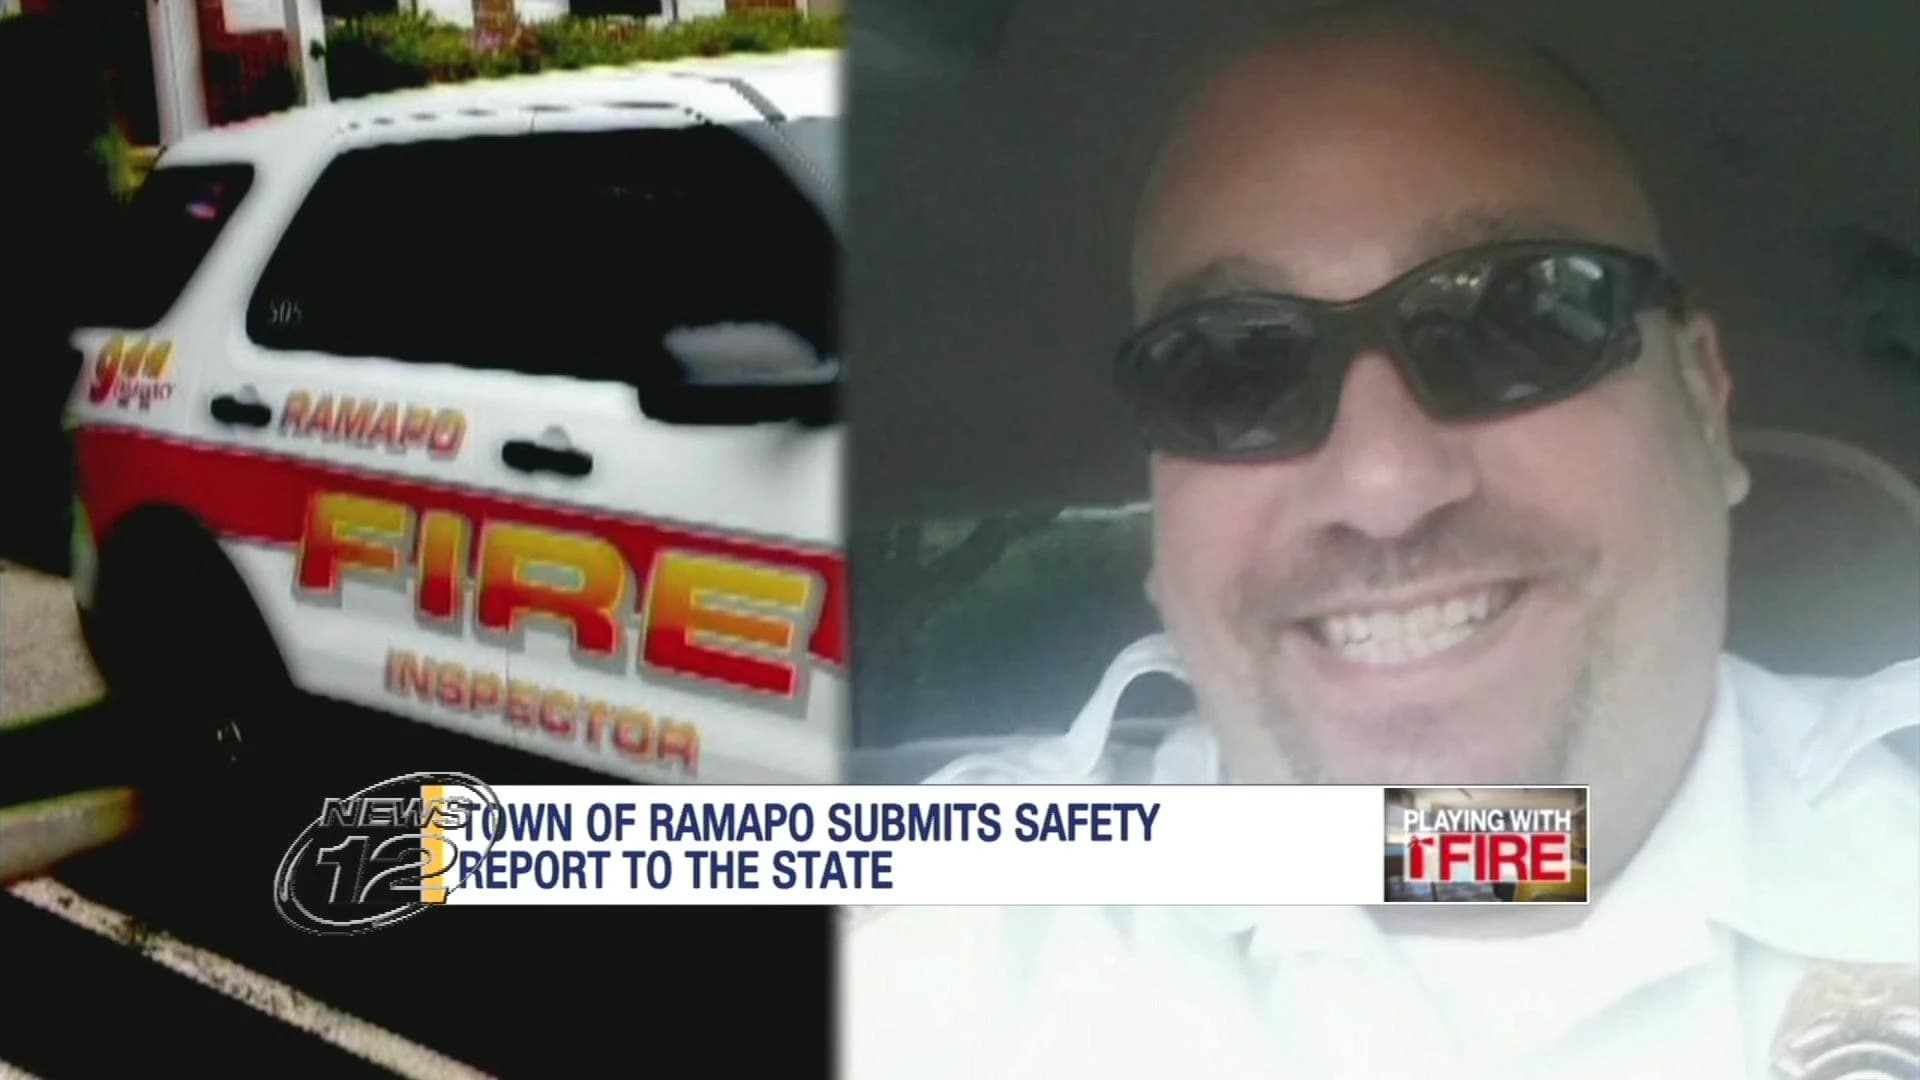 Playing with Fire: Ramapo outlines plan of action